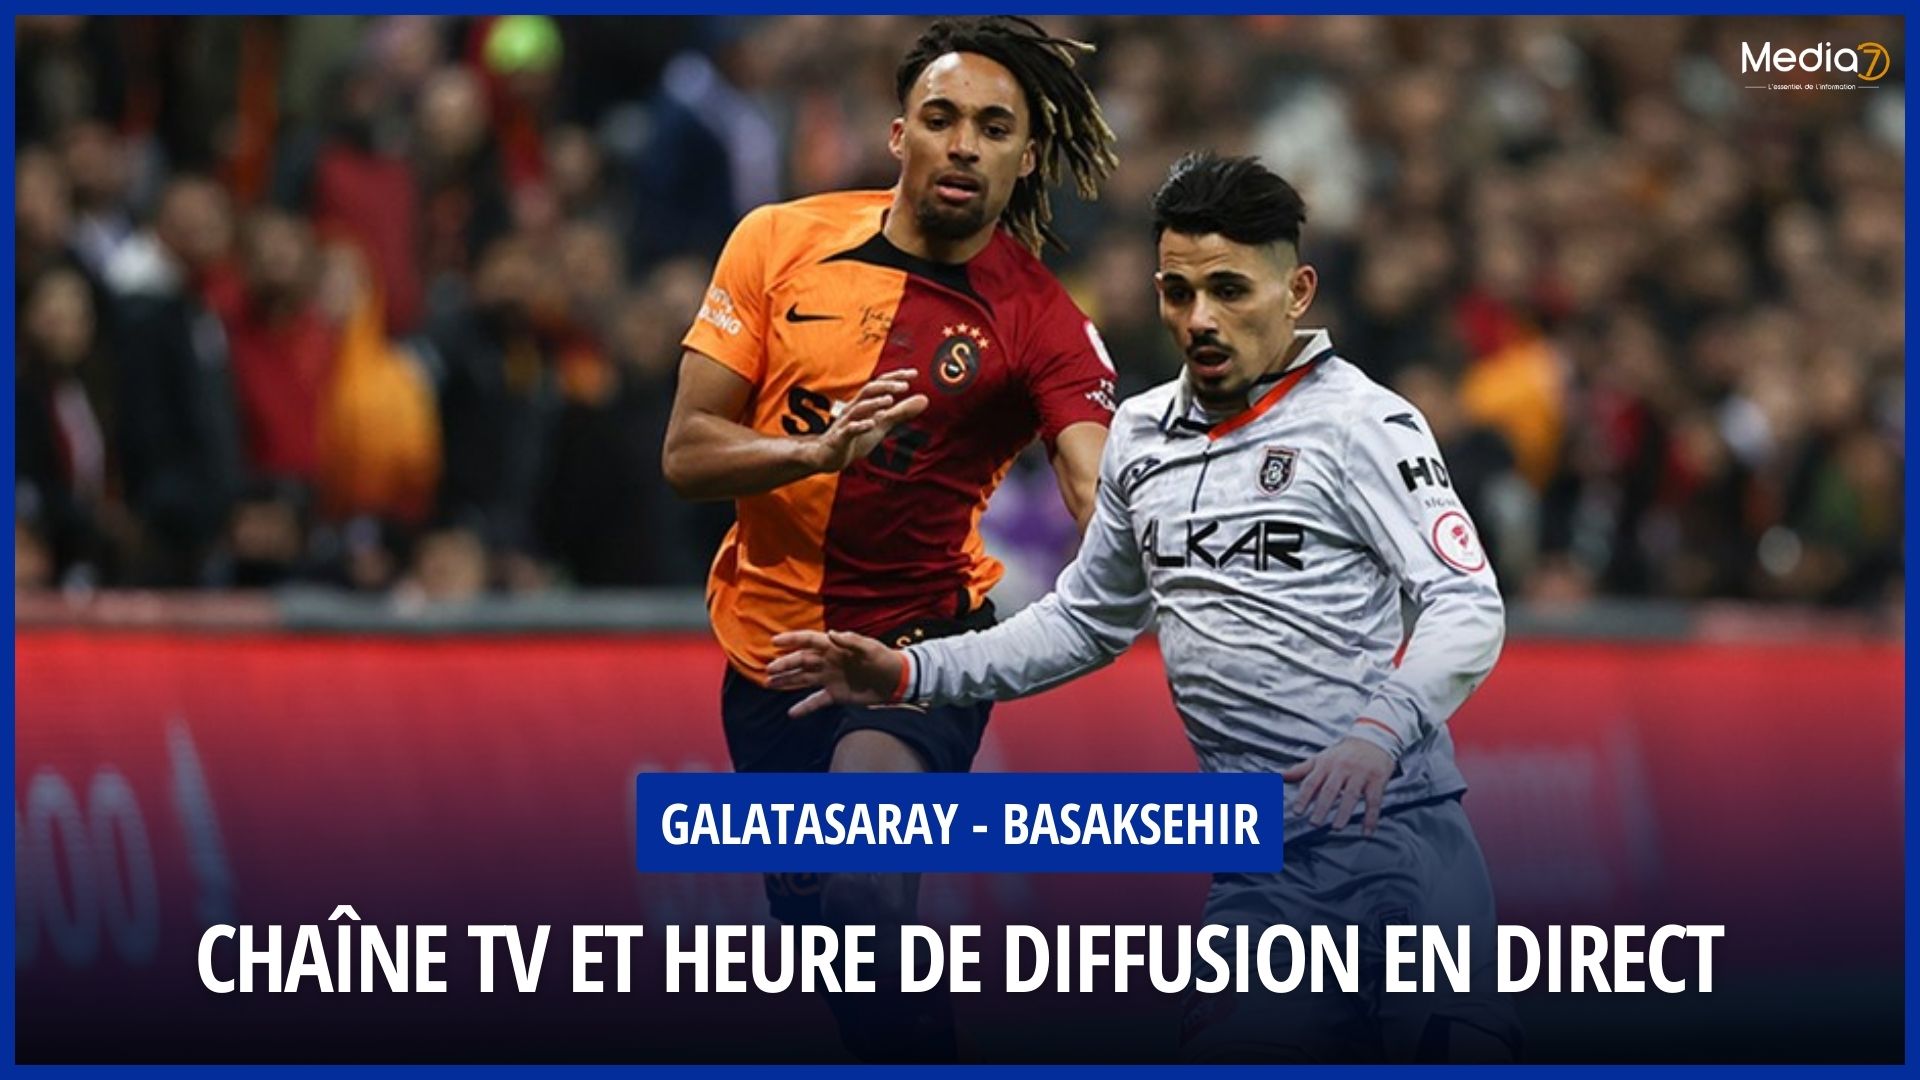 Match Galatasaray - Basaksehir live: Times and Broadcast TV & Streaming - Media7